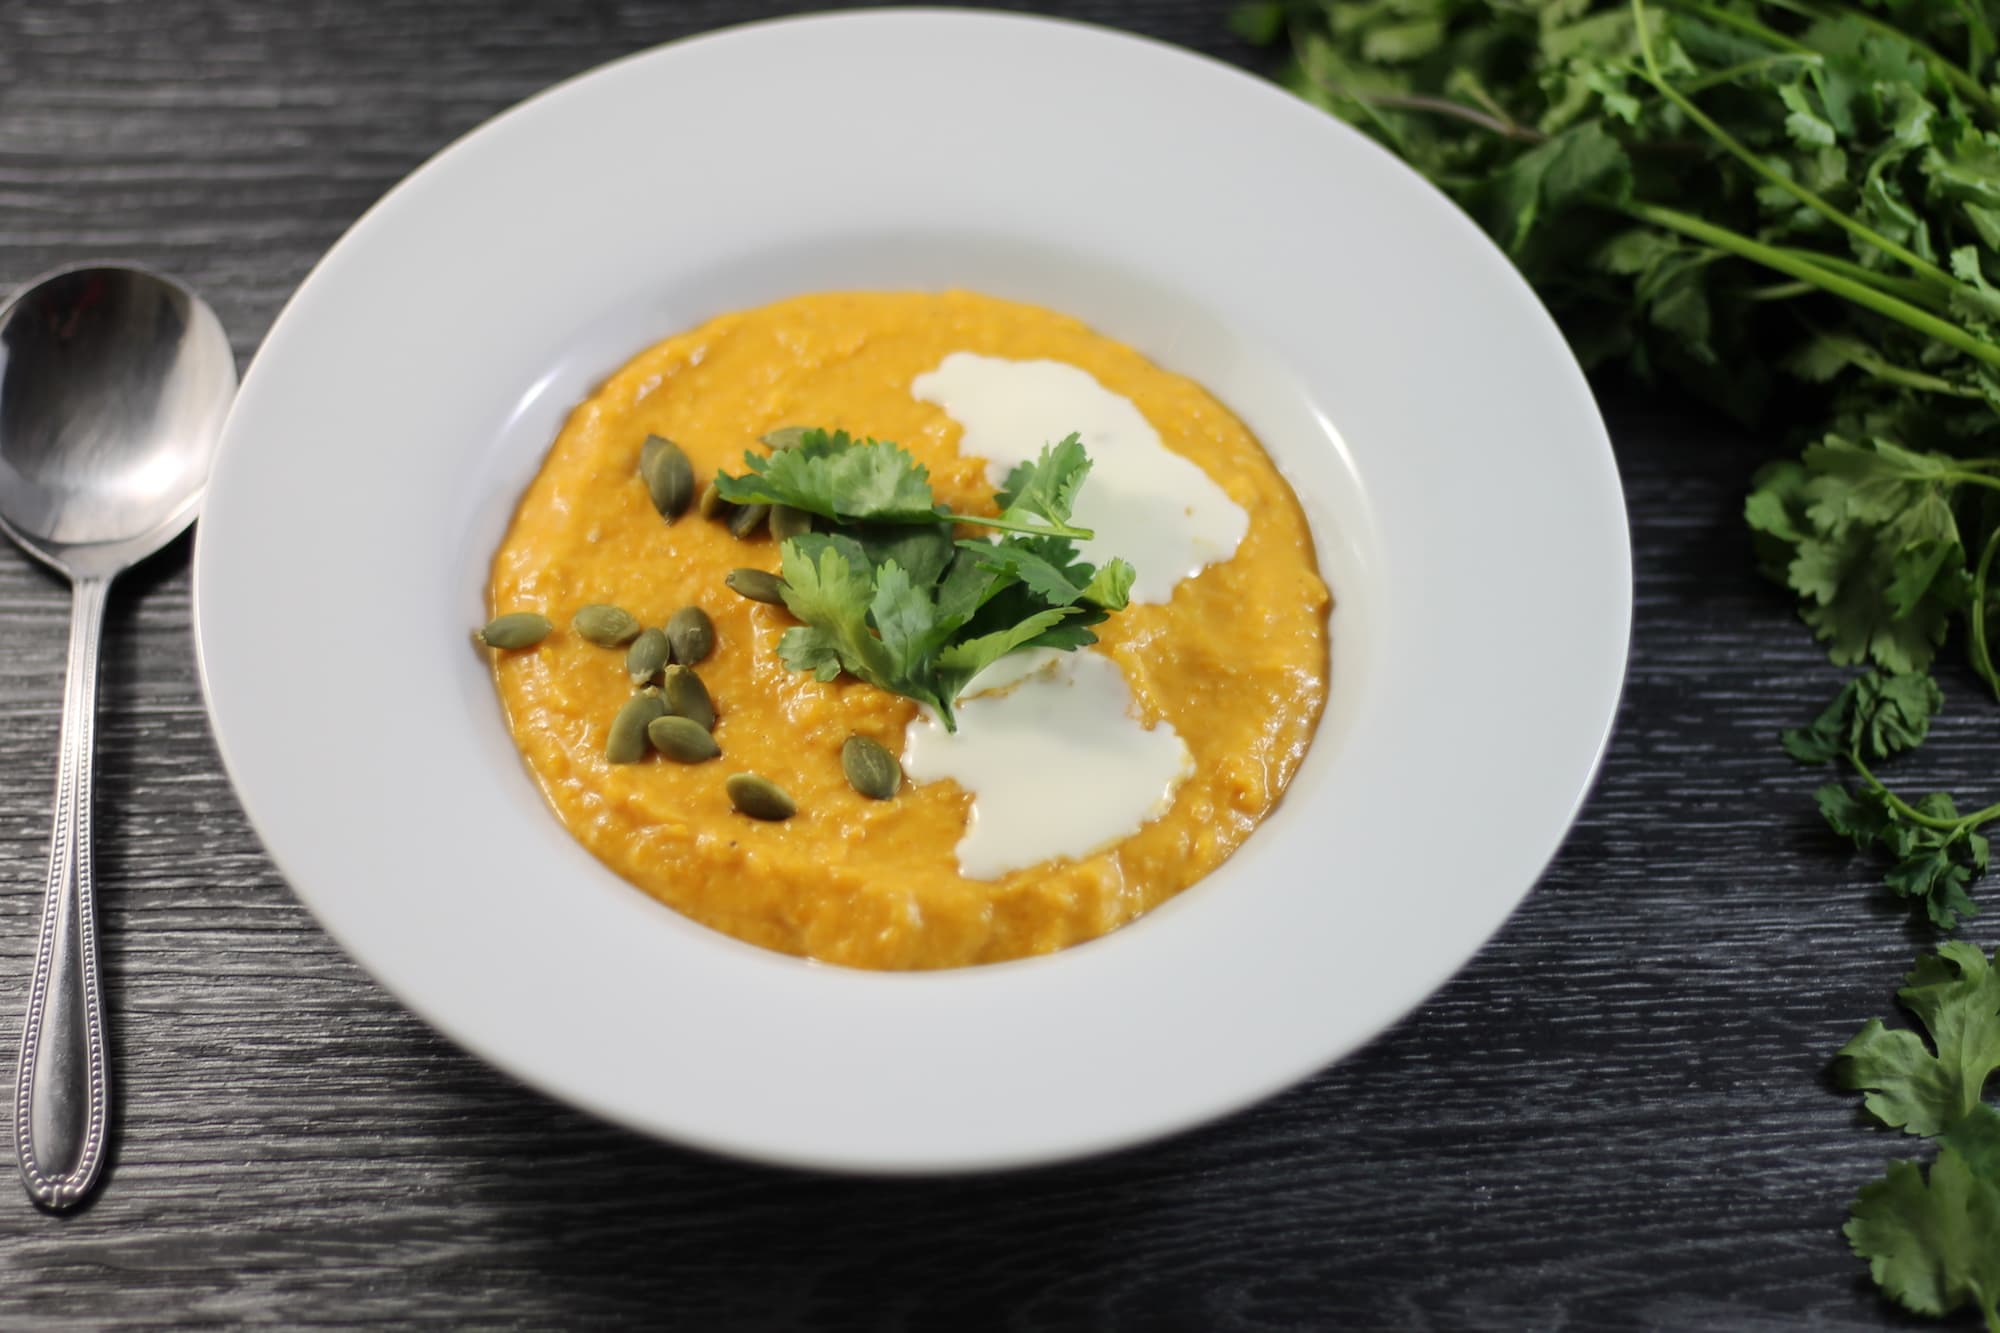 Keto Thai Pumpkin Soup by Aussie Keto Queen Because of the pumpkin and coconut milk, this soup is higher in carbs than most of my keto dishes, but if your macros allow it and you are after some comfort food, this hits the spot!